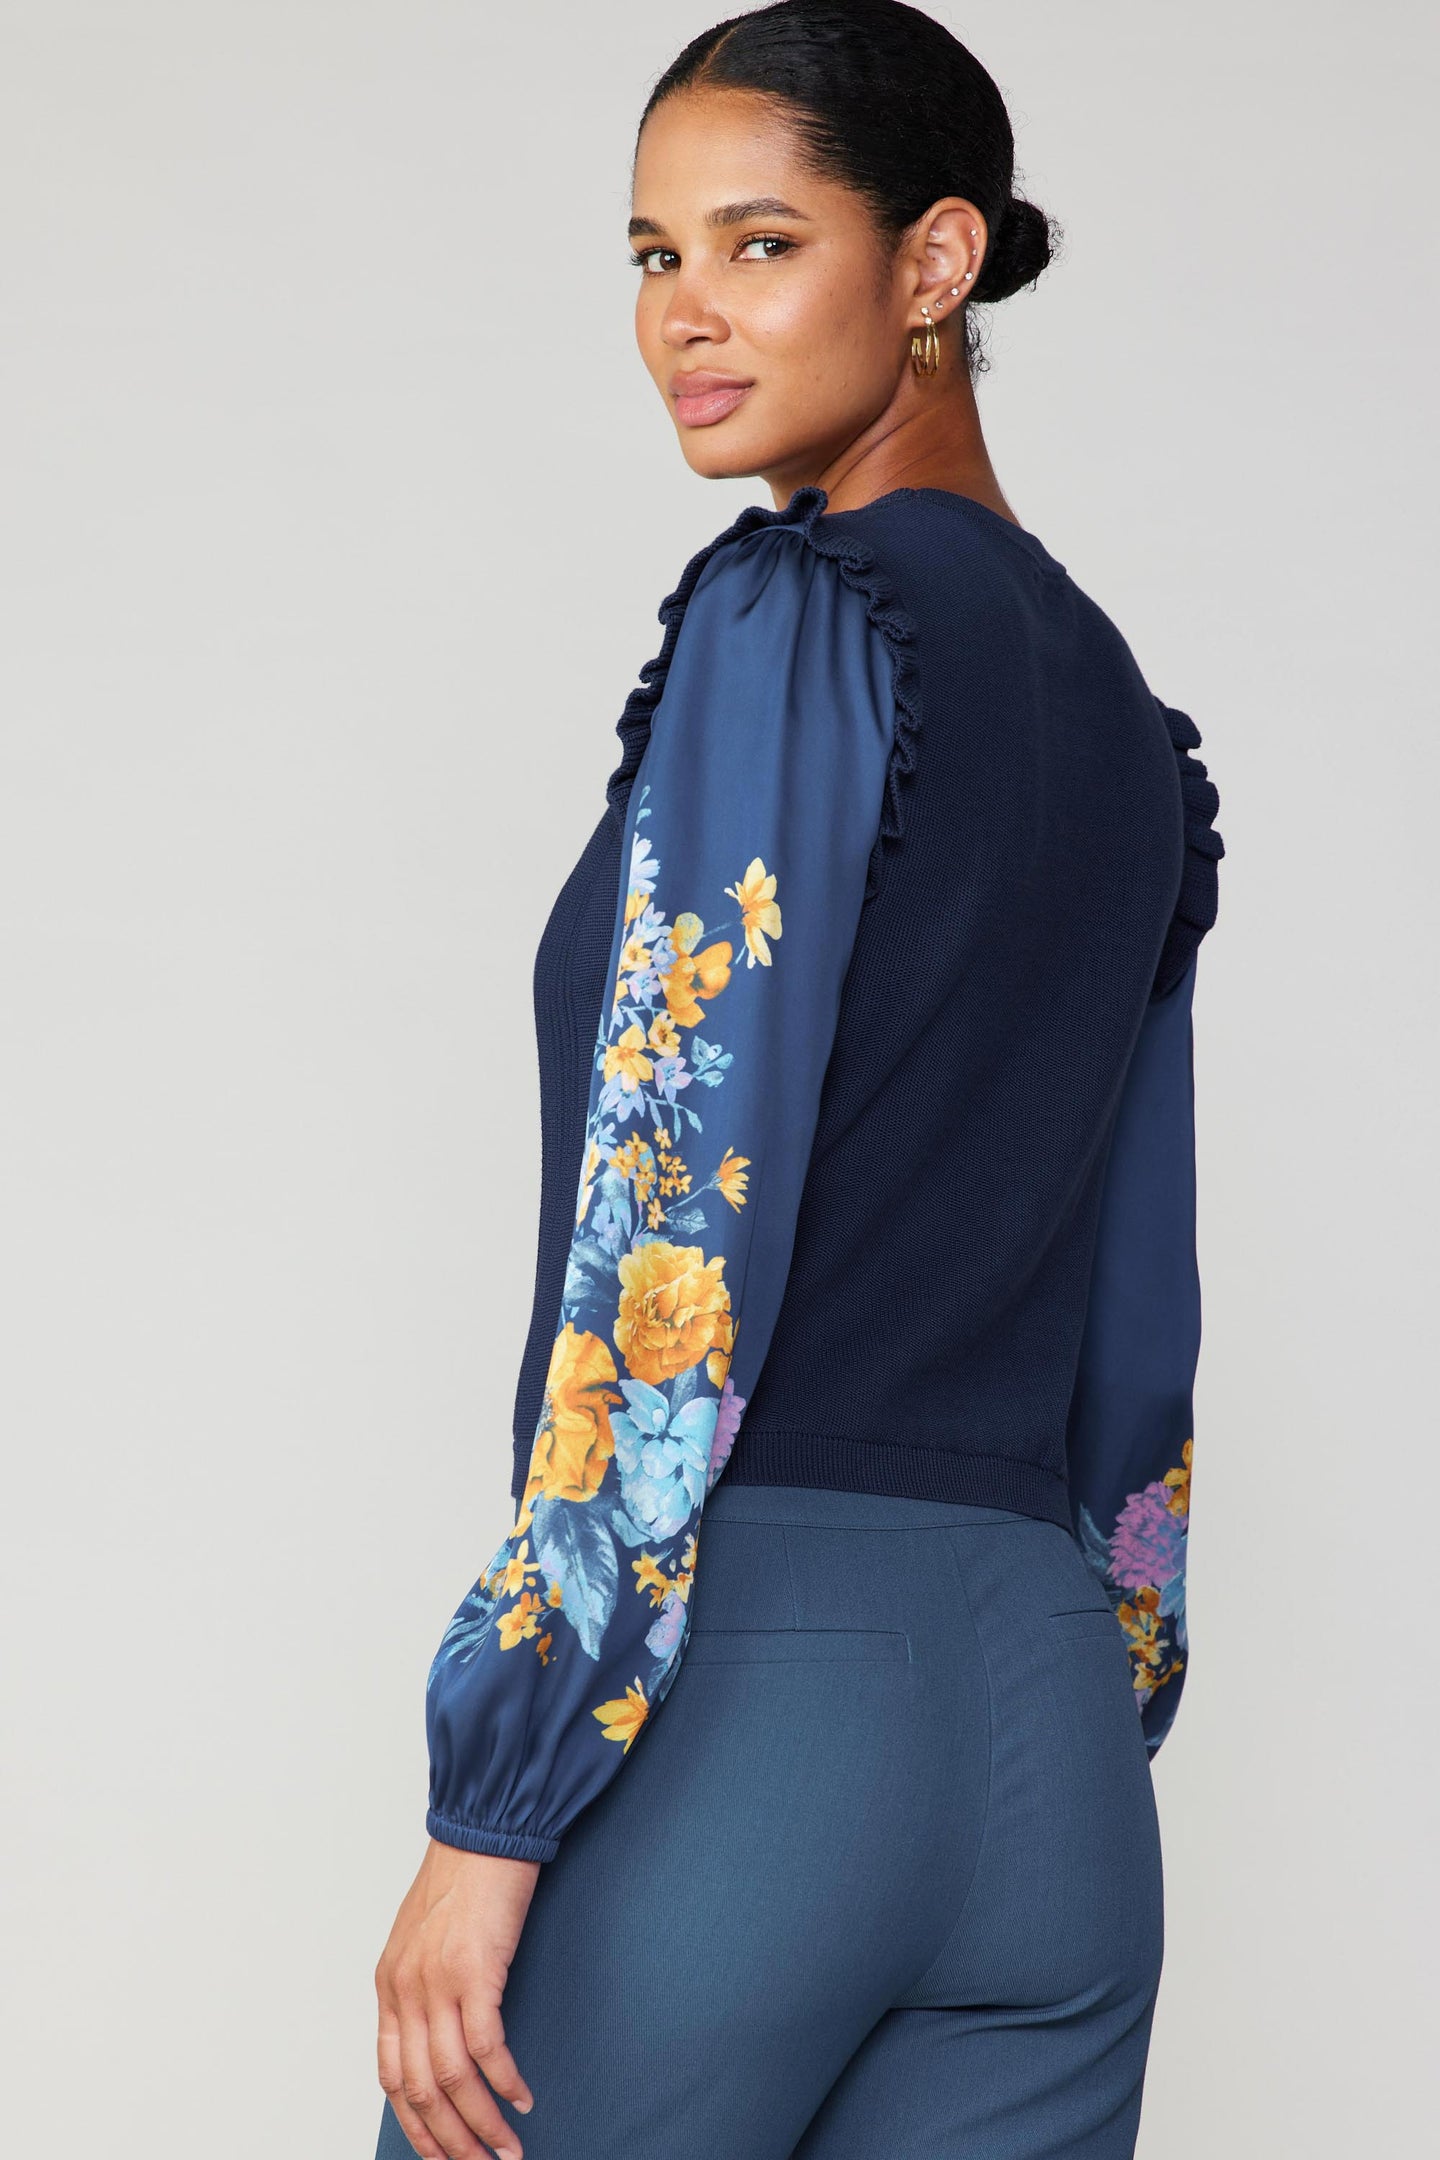 Floral Print Contrast Sweater Top